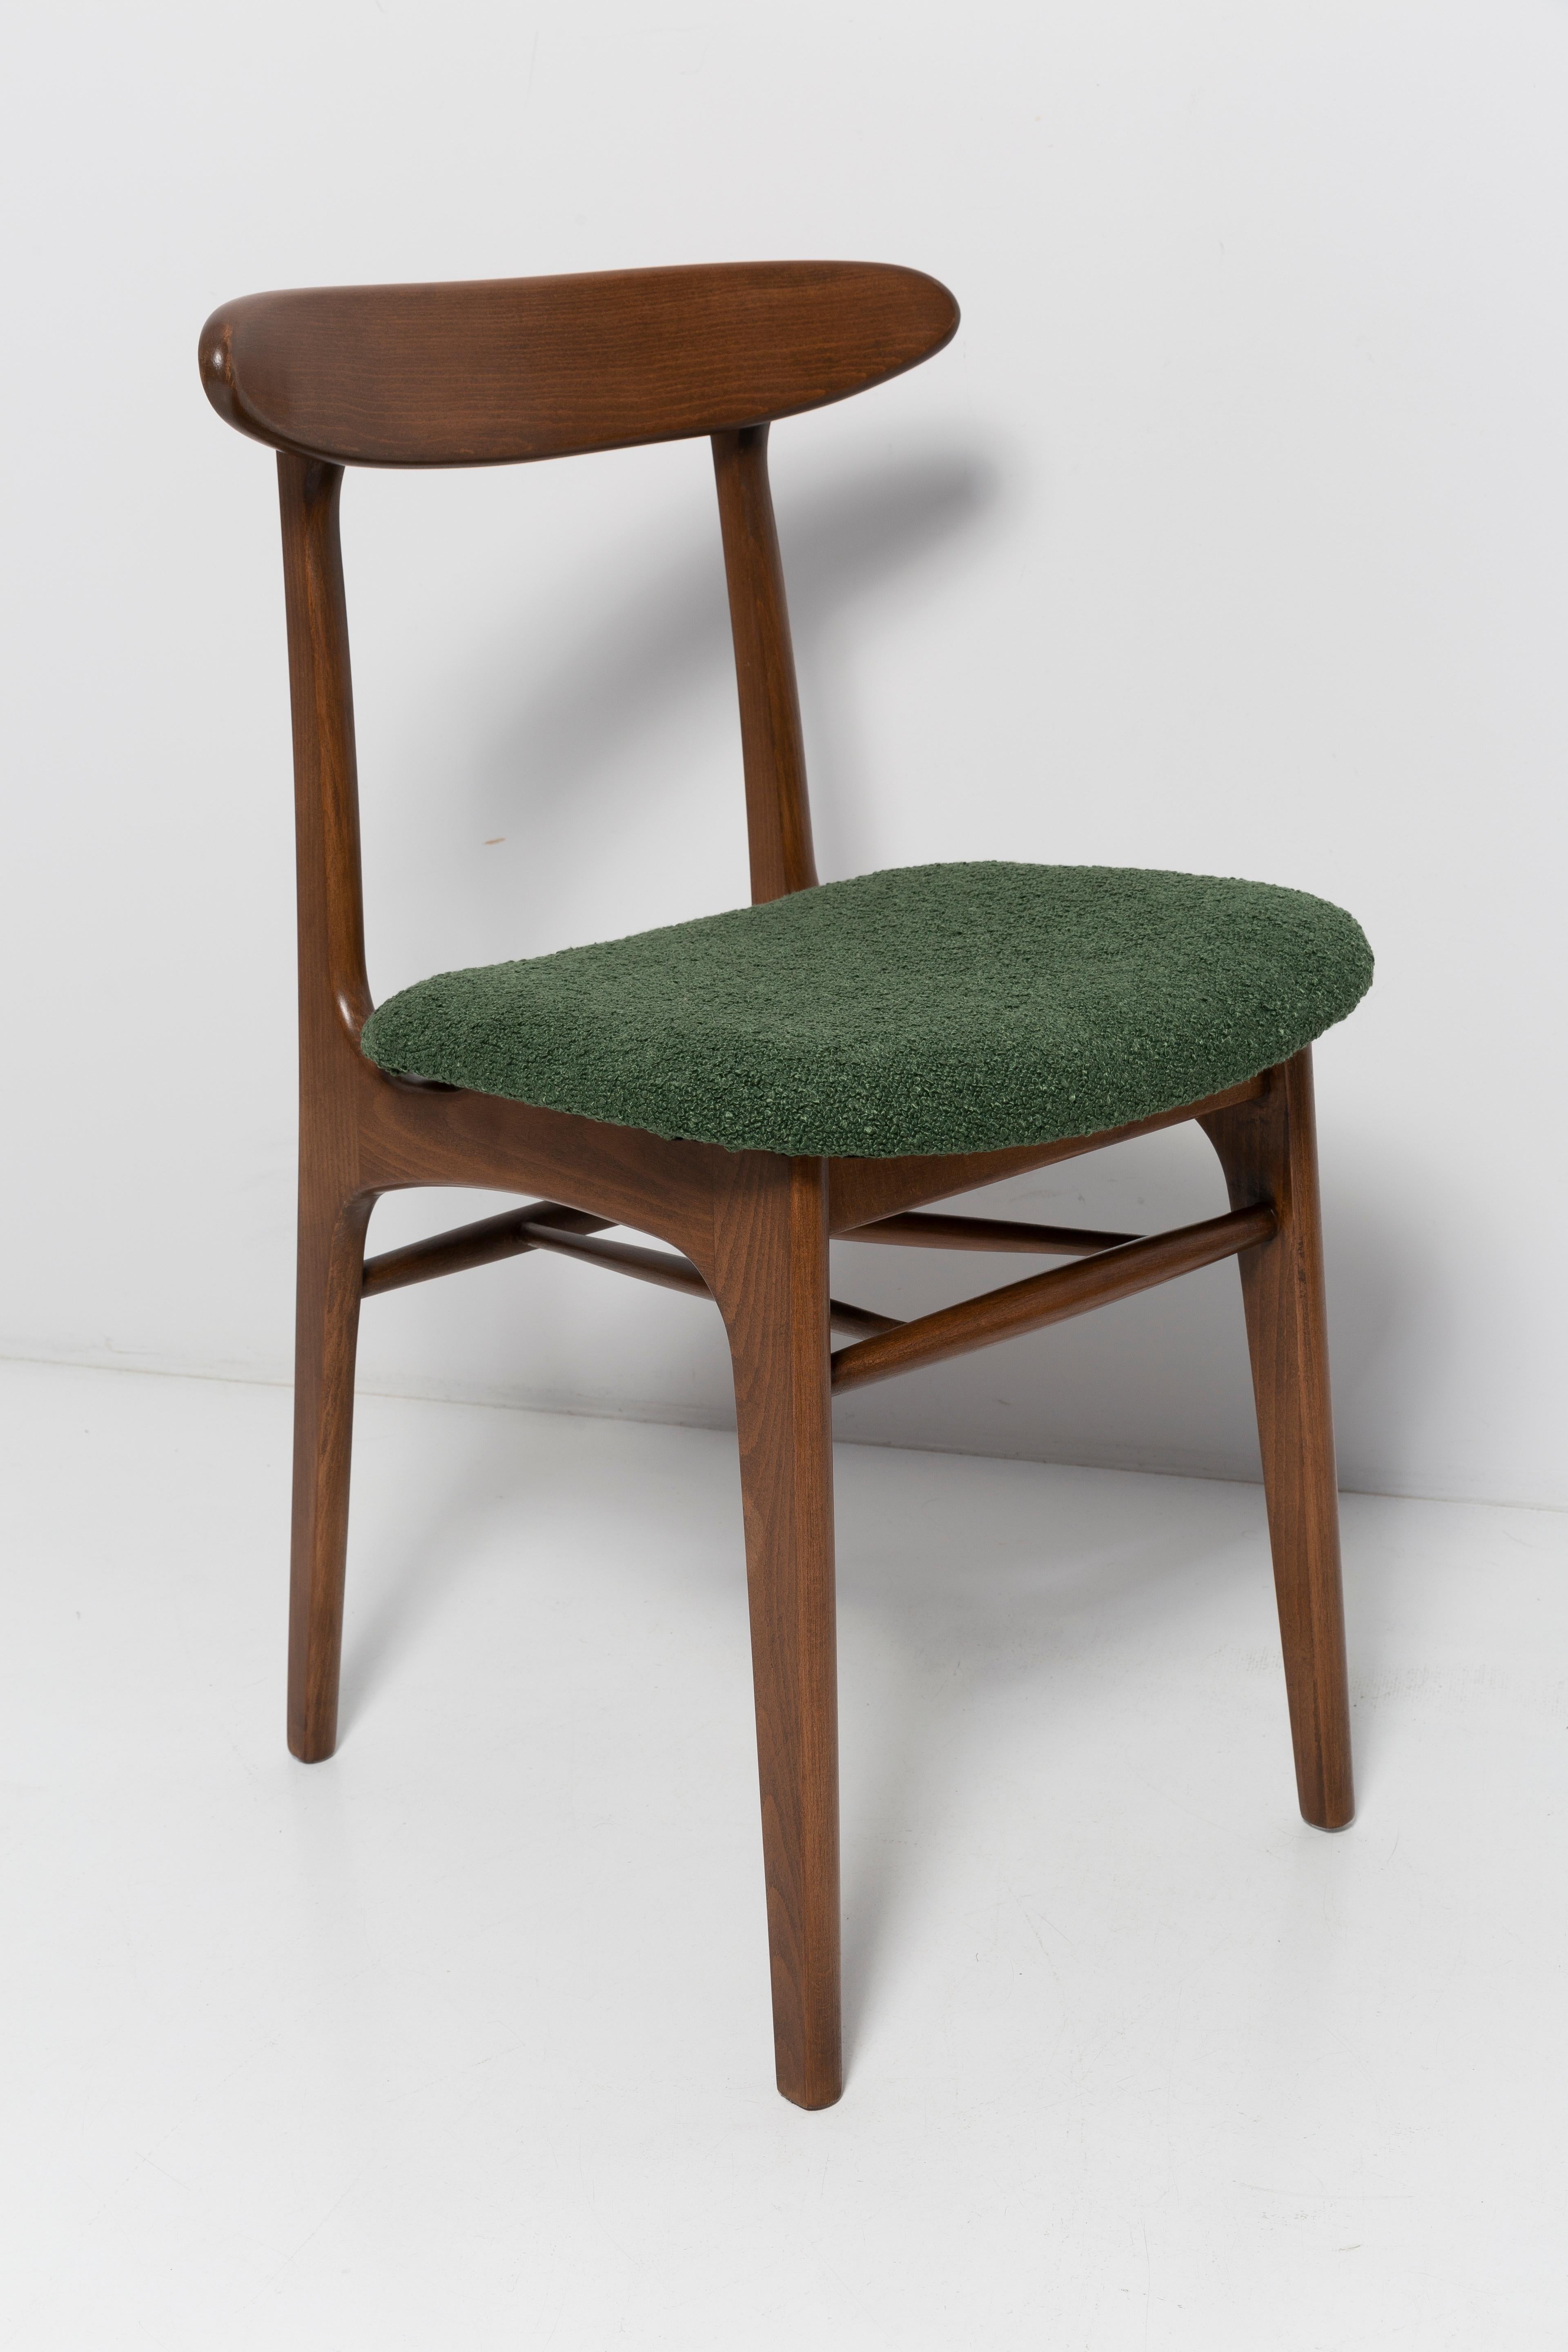 Chair designed by Prof. Rajmund Halas. Made of beechwood. Chair is after a complete upholstery renovation, the woodwork has been refreshed. Seat is dressed in green, durable and pleasant to the touch unique boucle spanish fabric. Chair is stable and